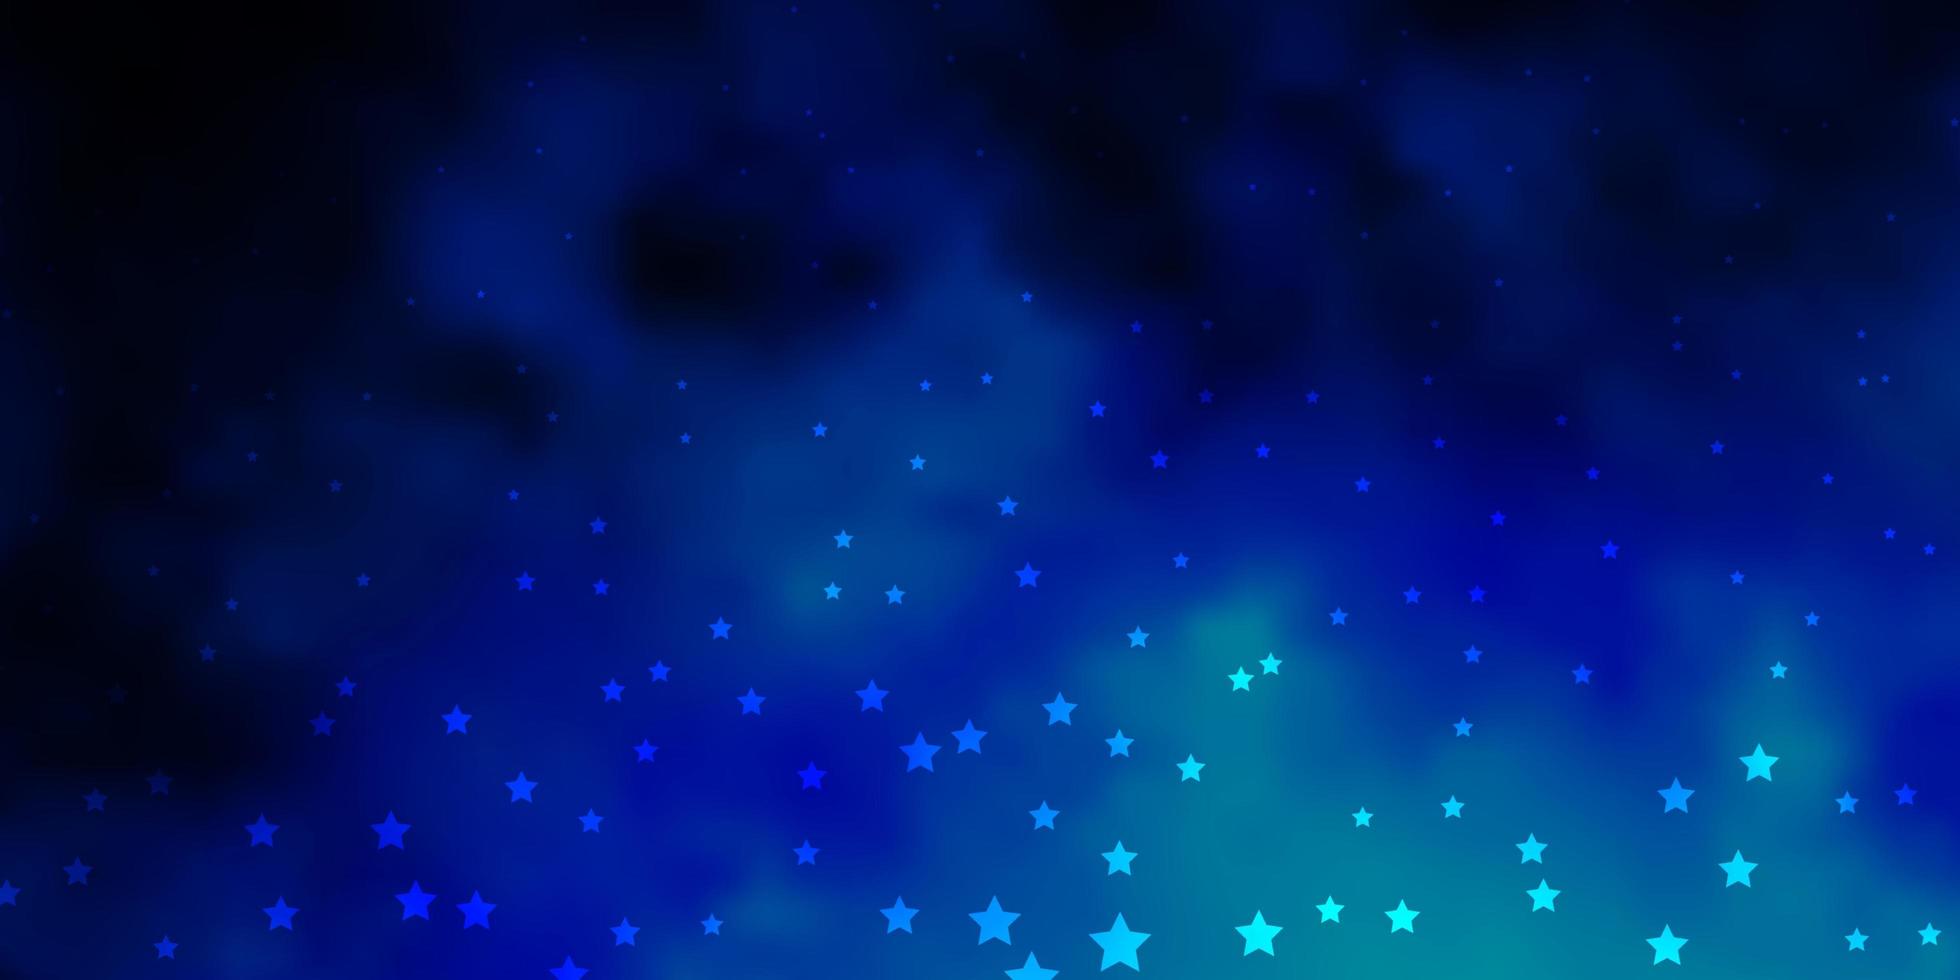 Dark BLUE vector pattern with abstract stars